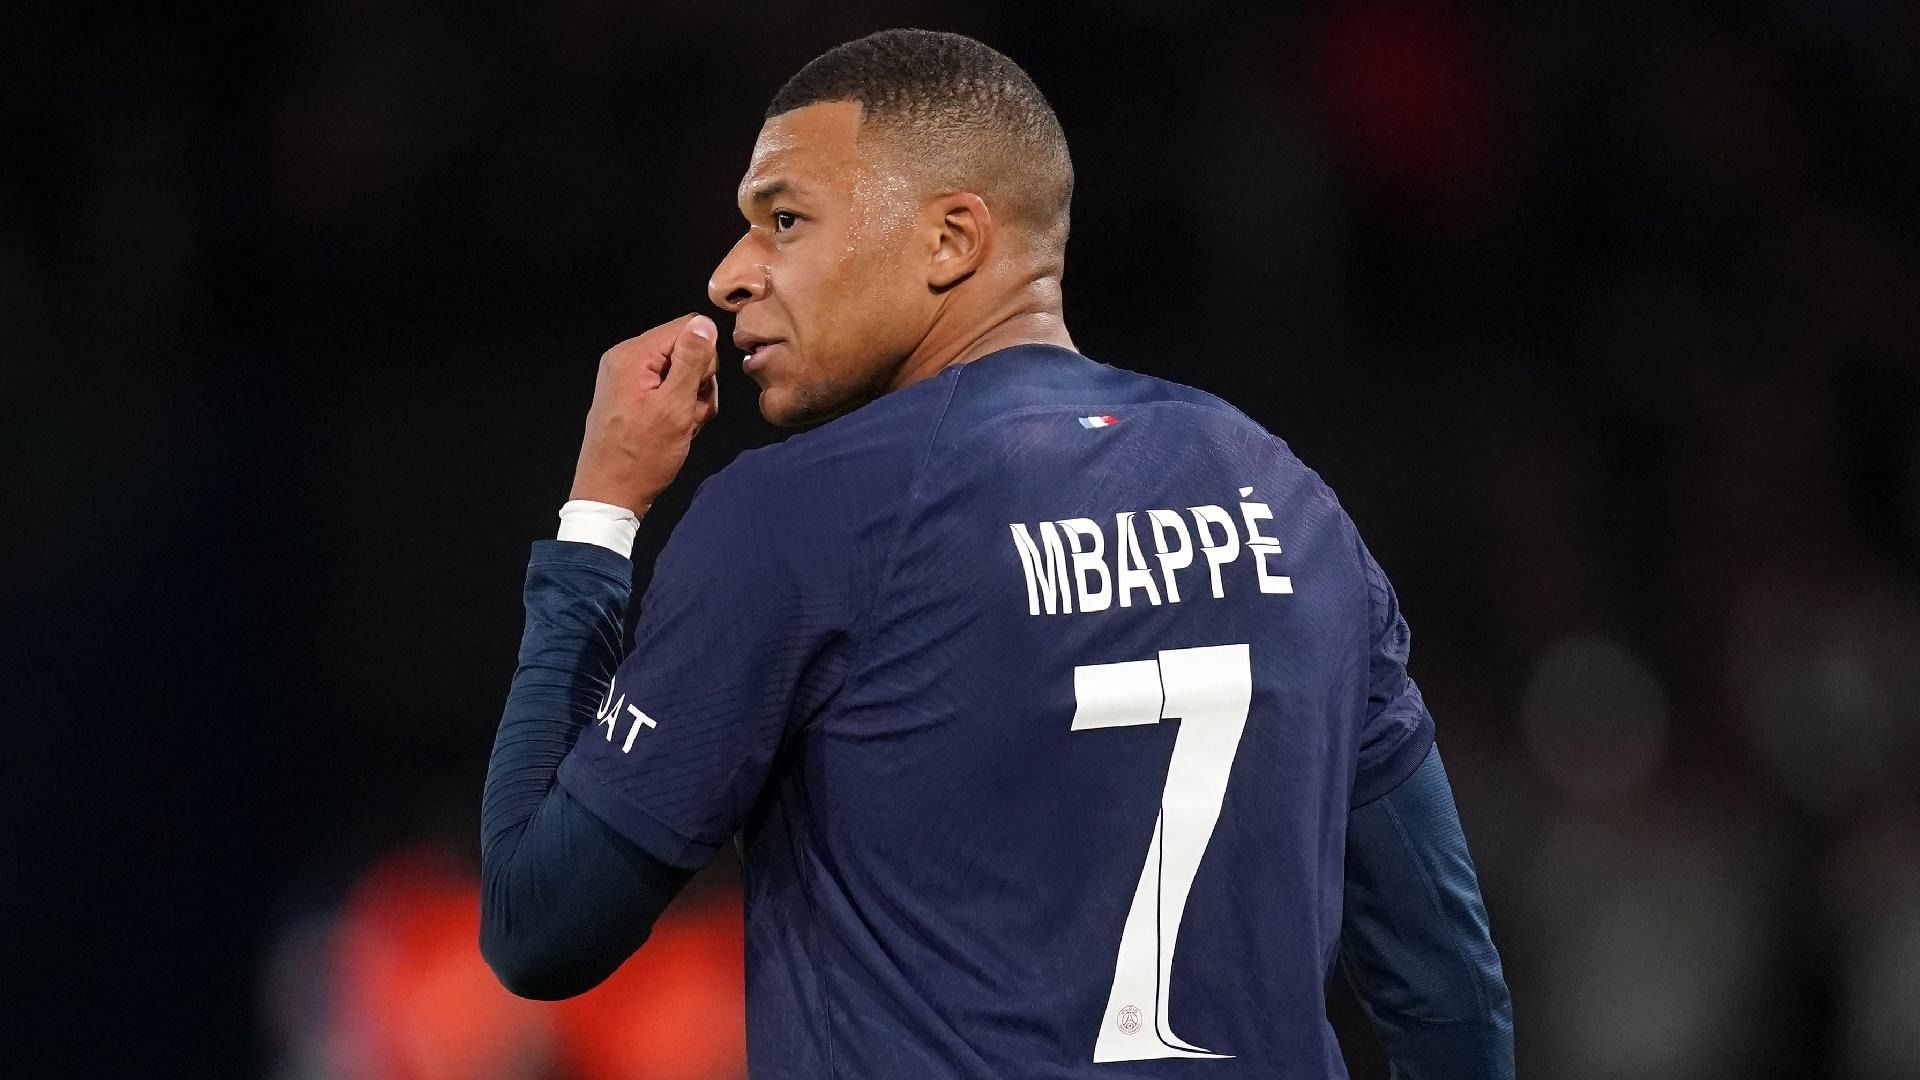 PSG Manager Denies Conflict With Mbappe